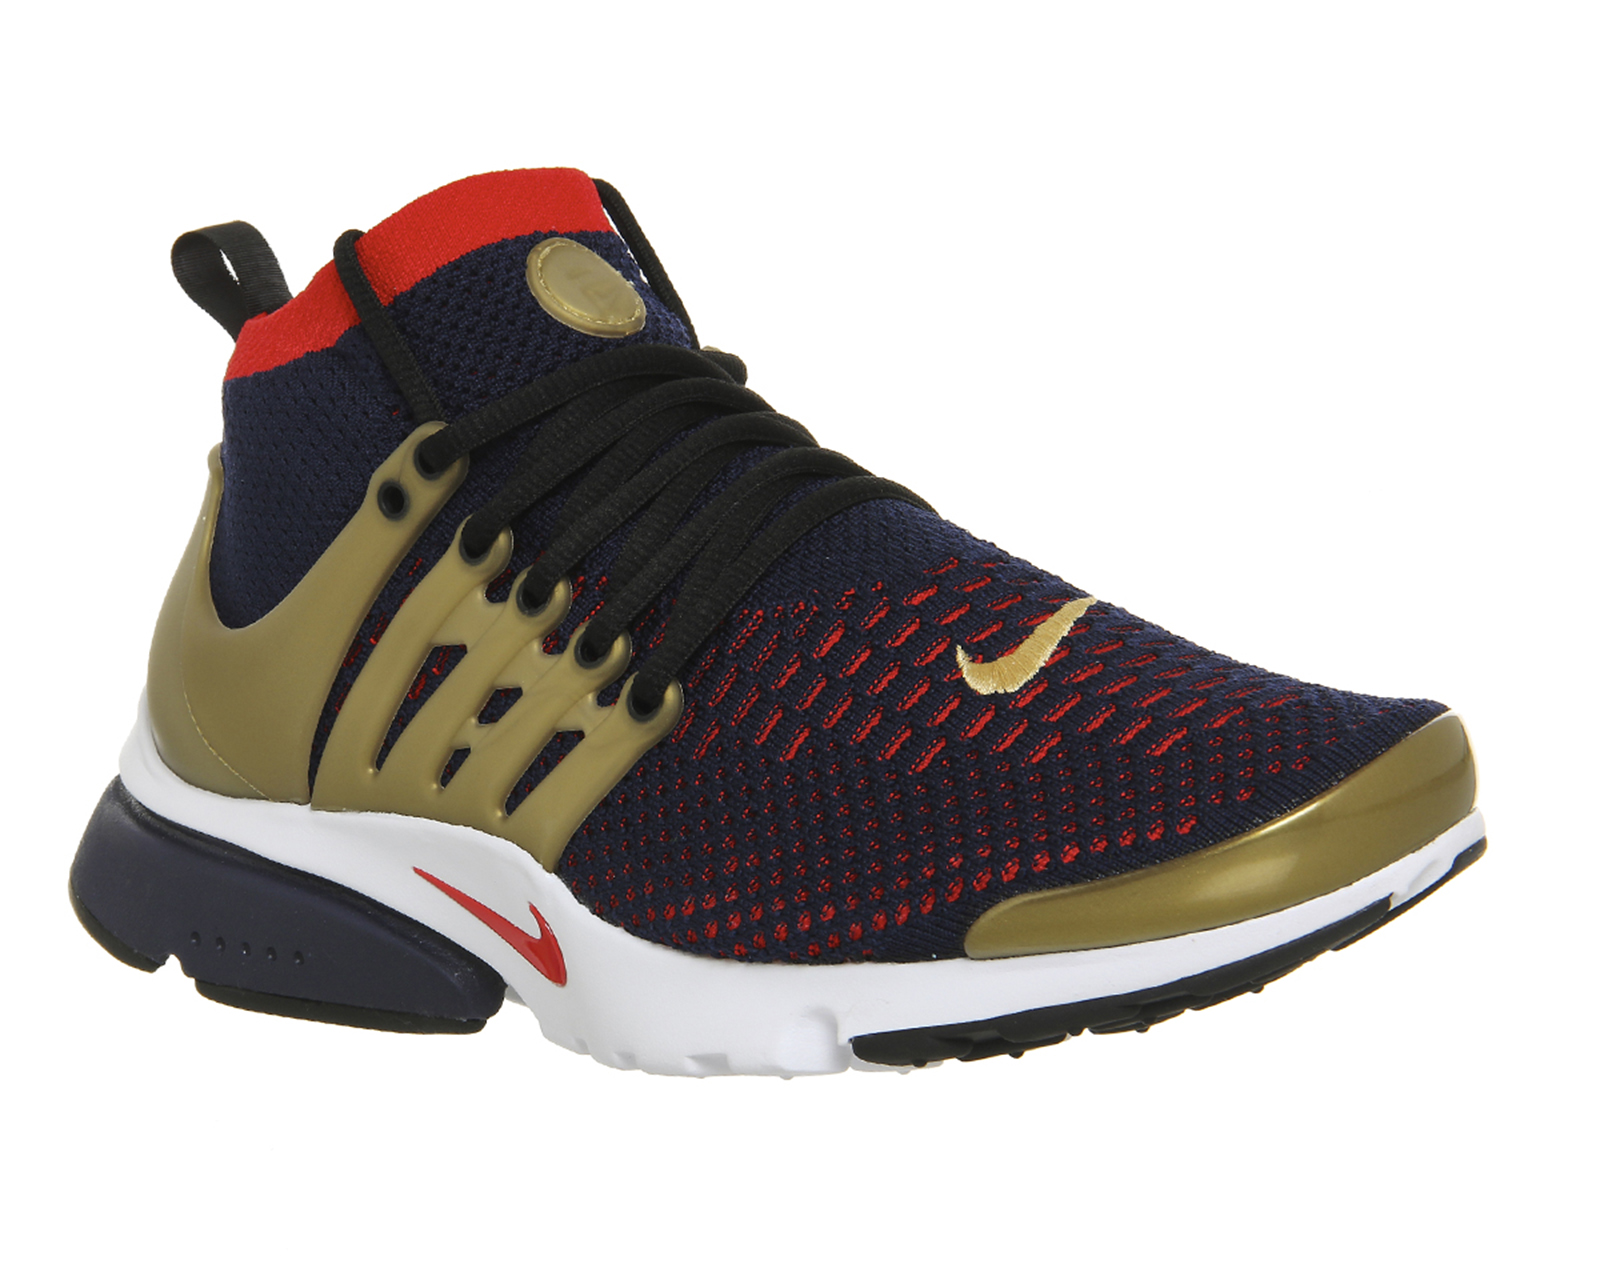 NikeAir Presto Flyknit UltraCollege Navy Red Gold